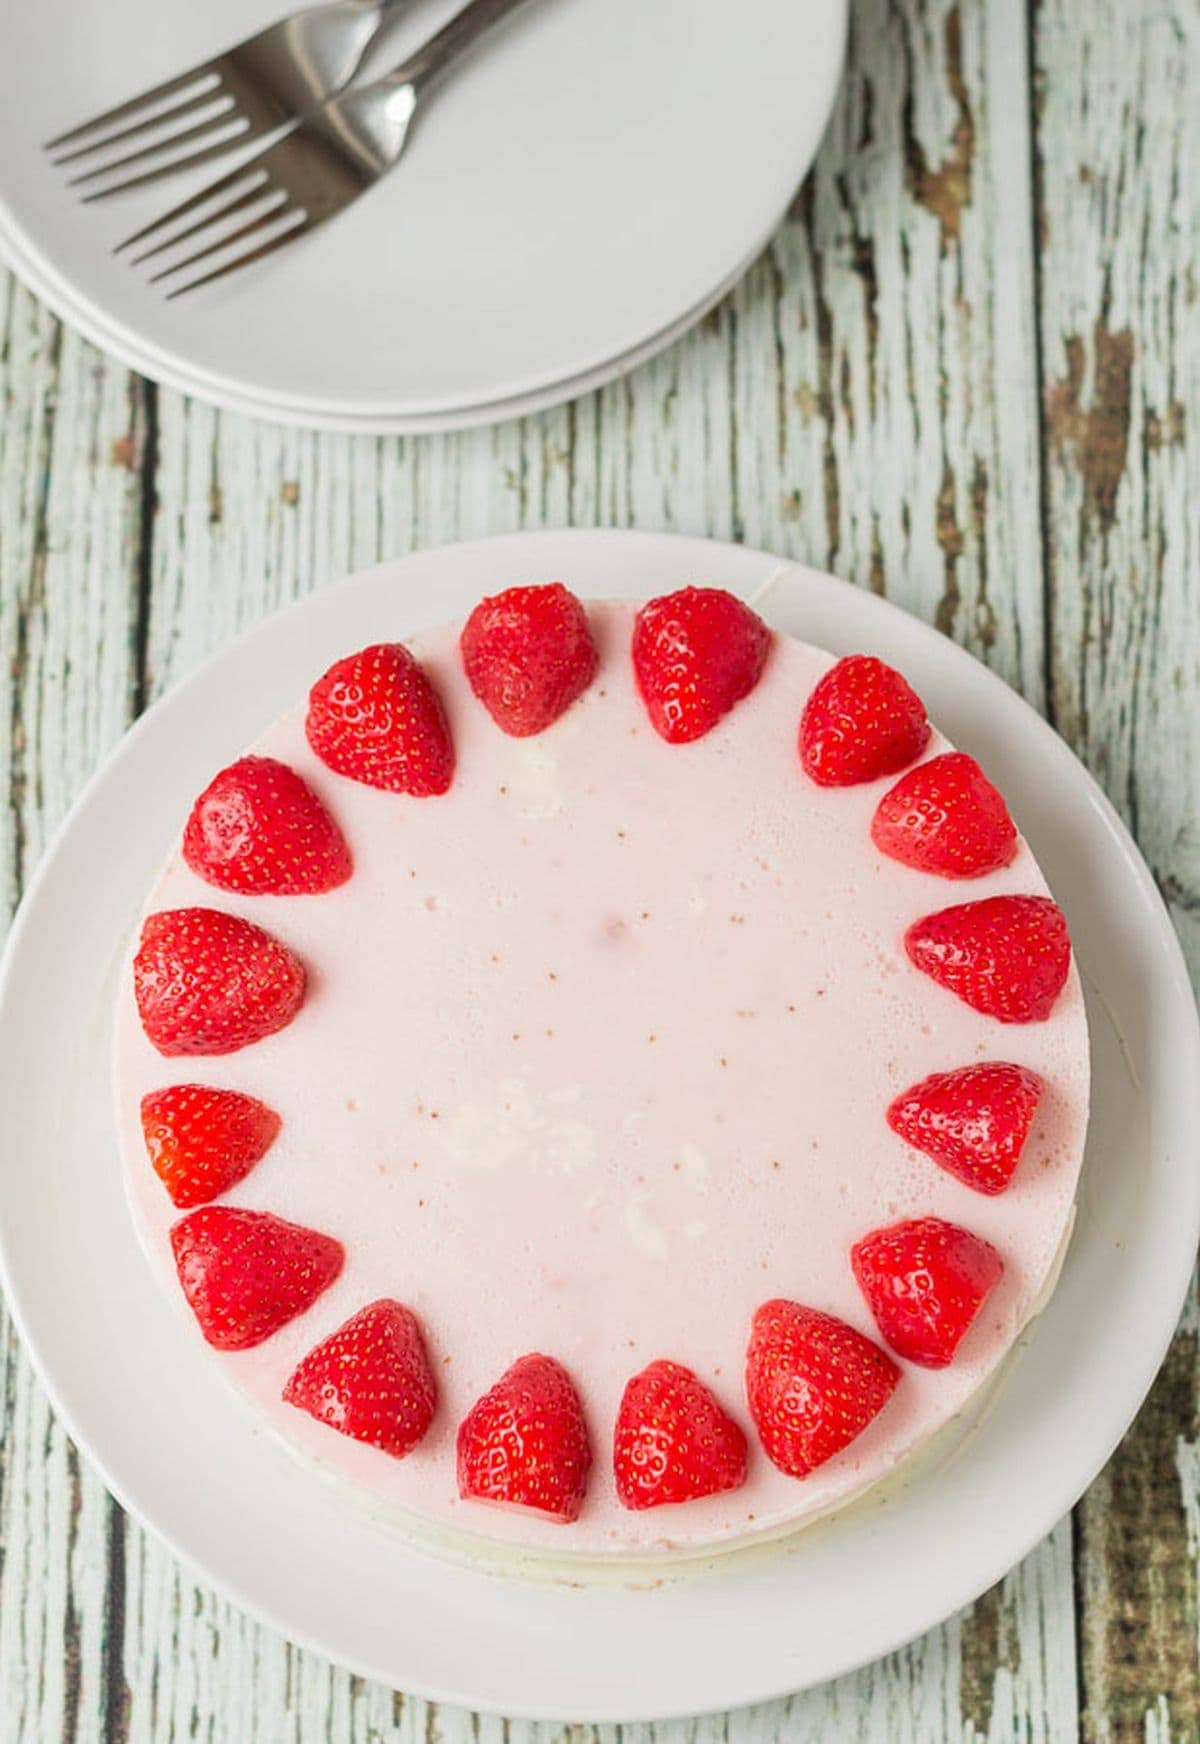 Birds eye view of a whole no bake strawberry mousse cheesecake decorated around the edge with halved strawberries. Serving plates and forks at the top.